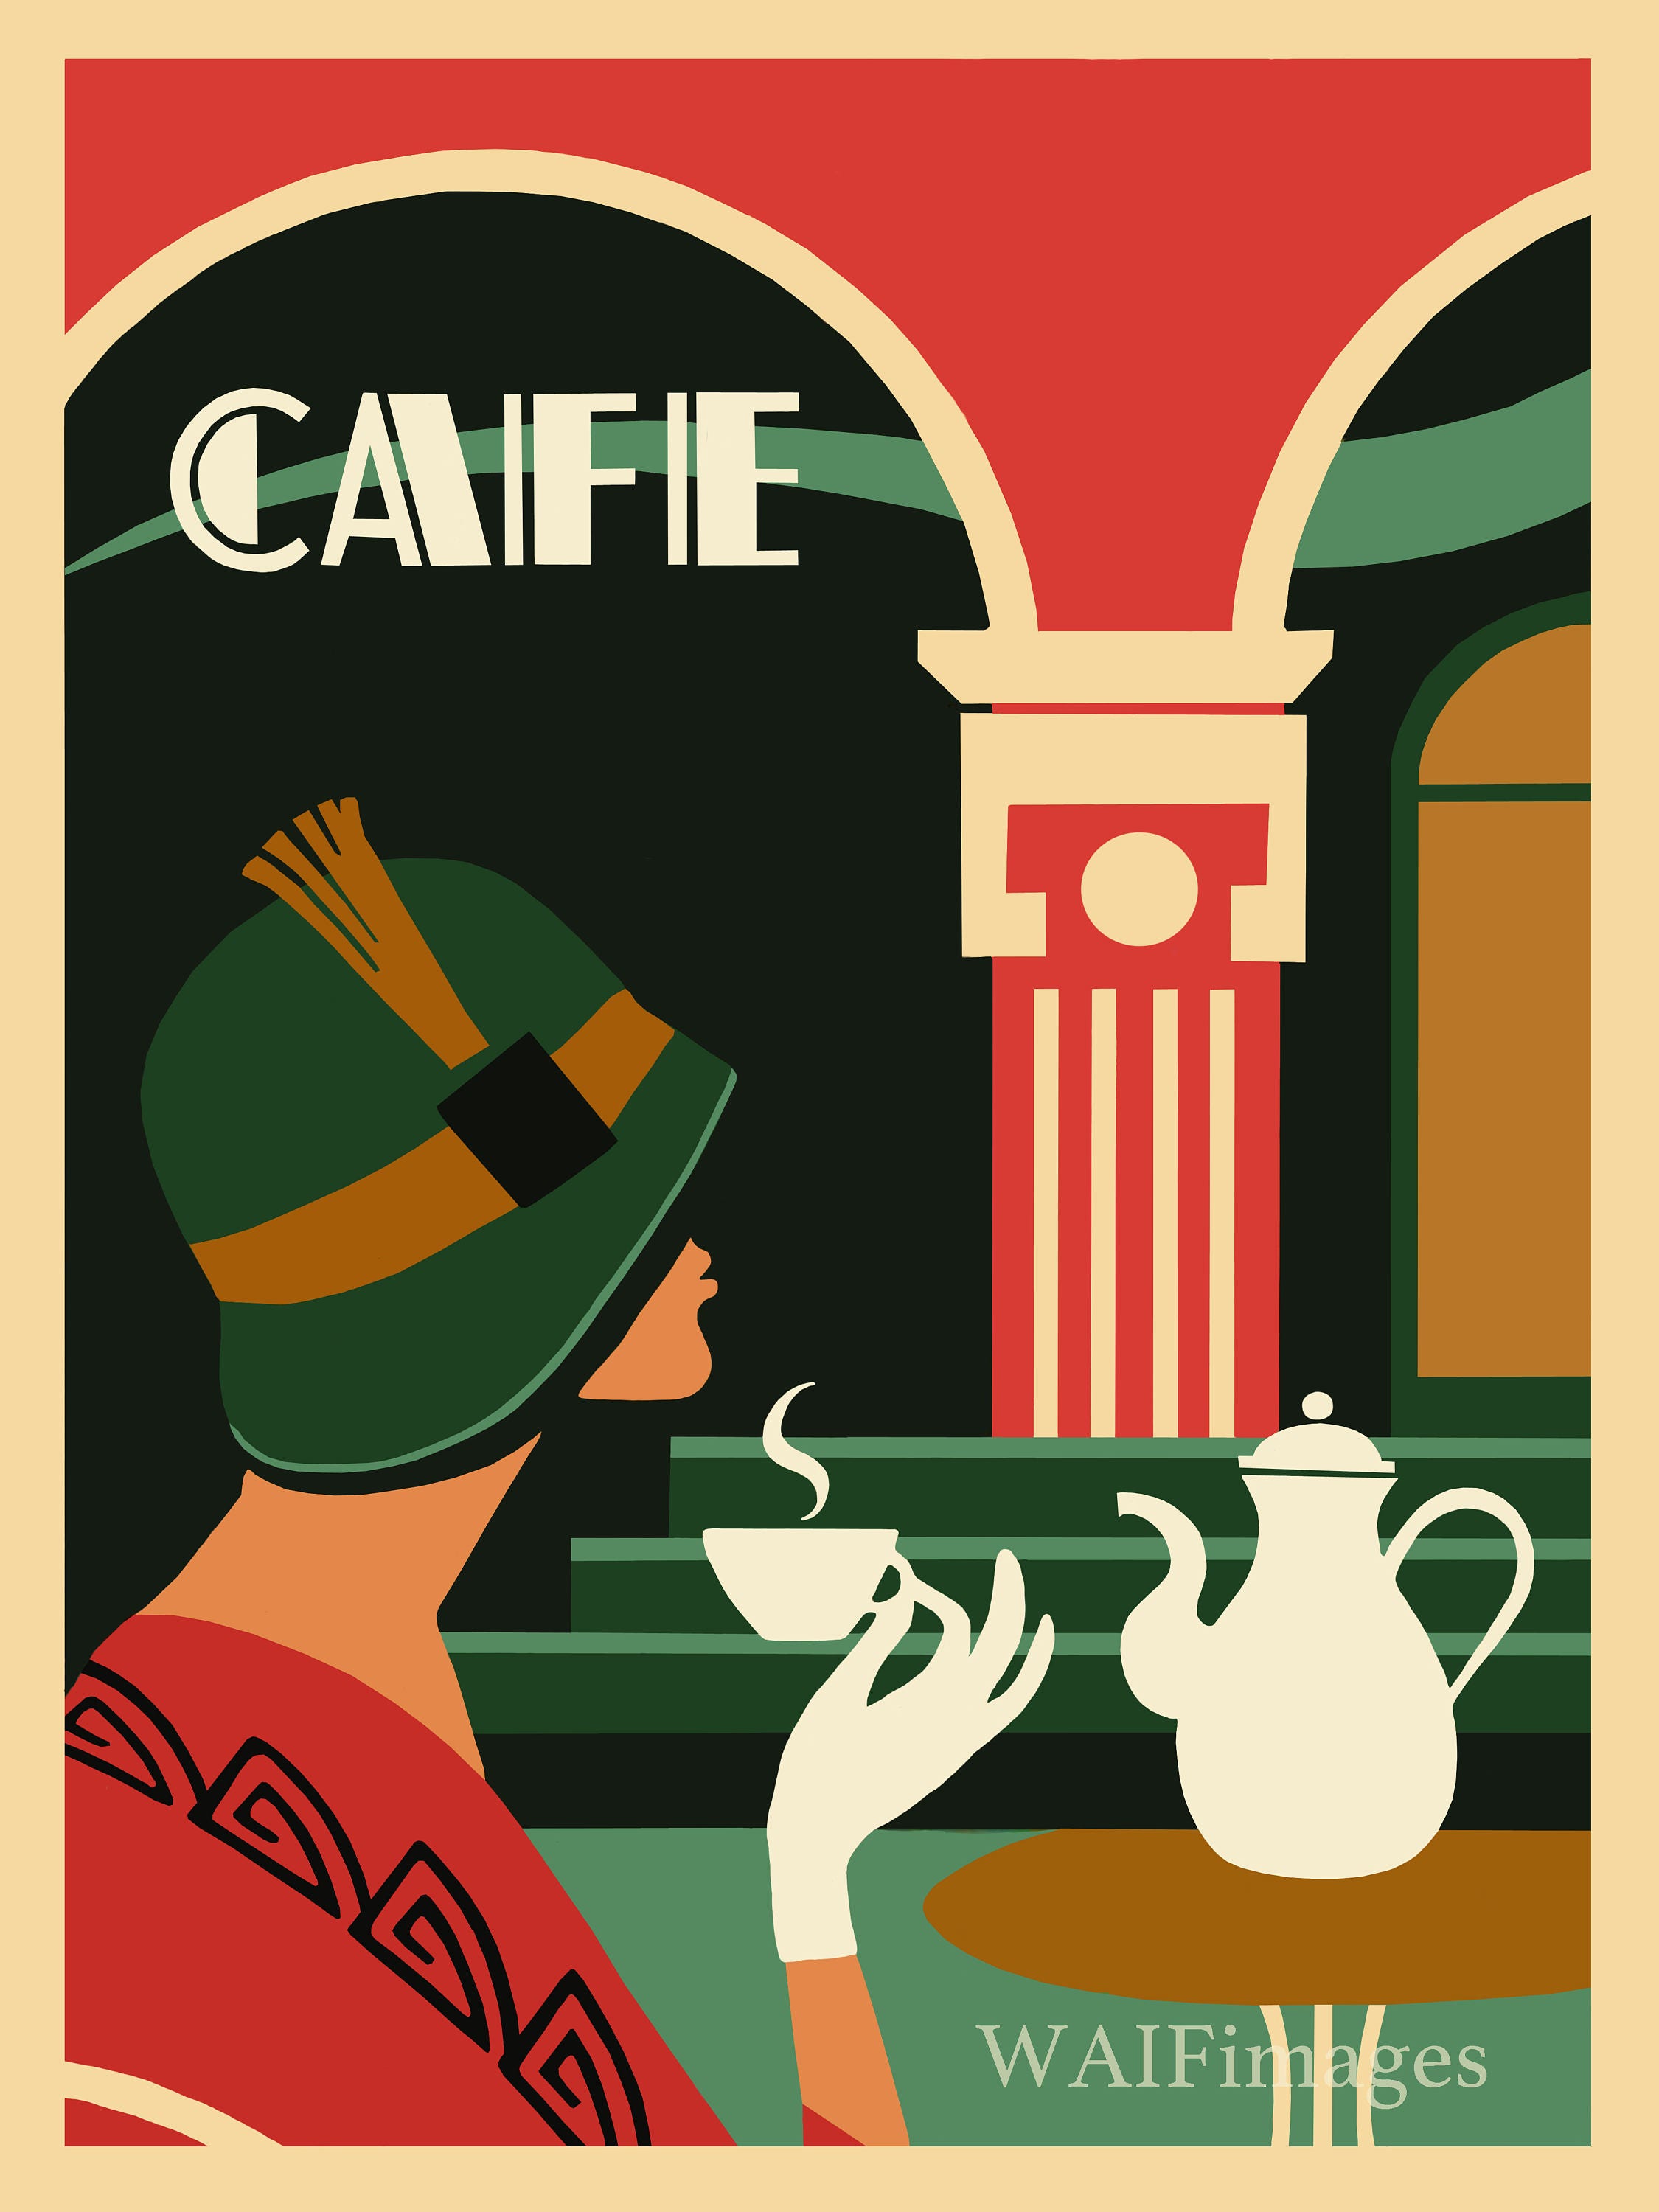 Art Deco Cafe  Style cute 1920s style poster  ideal for the 